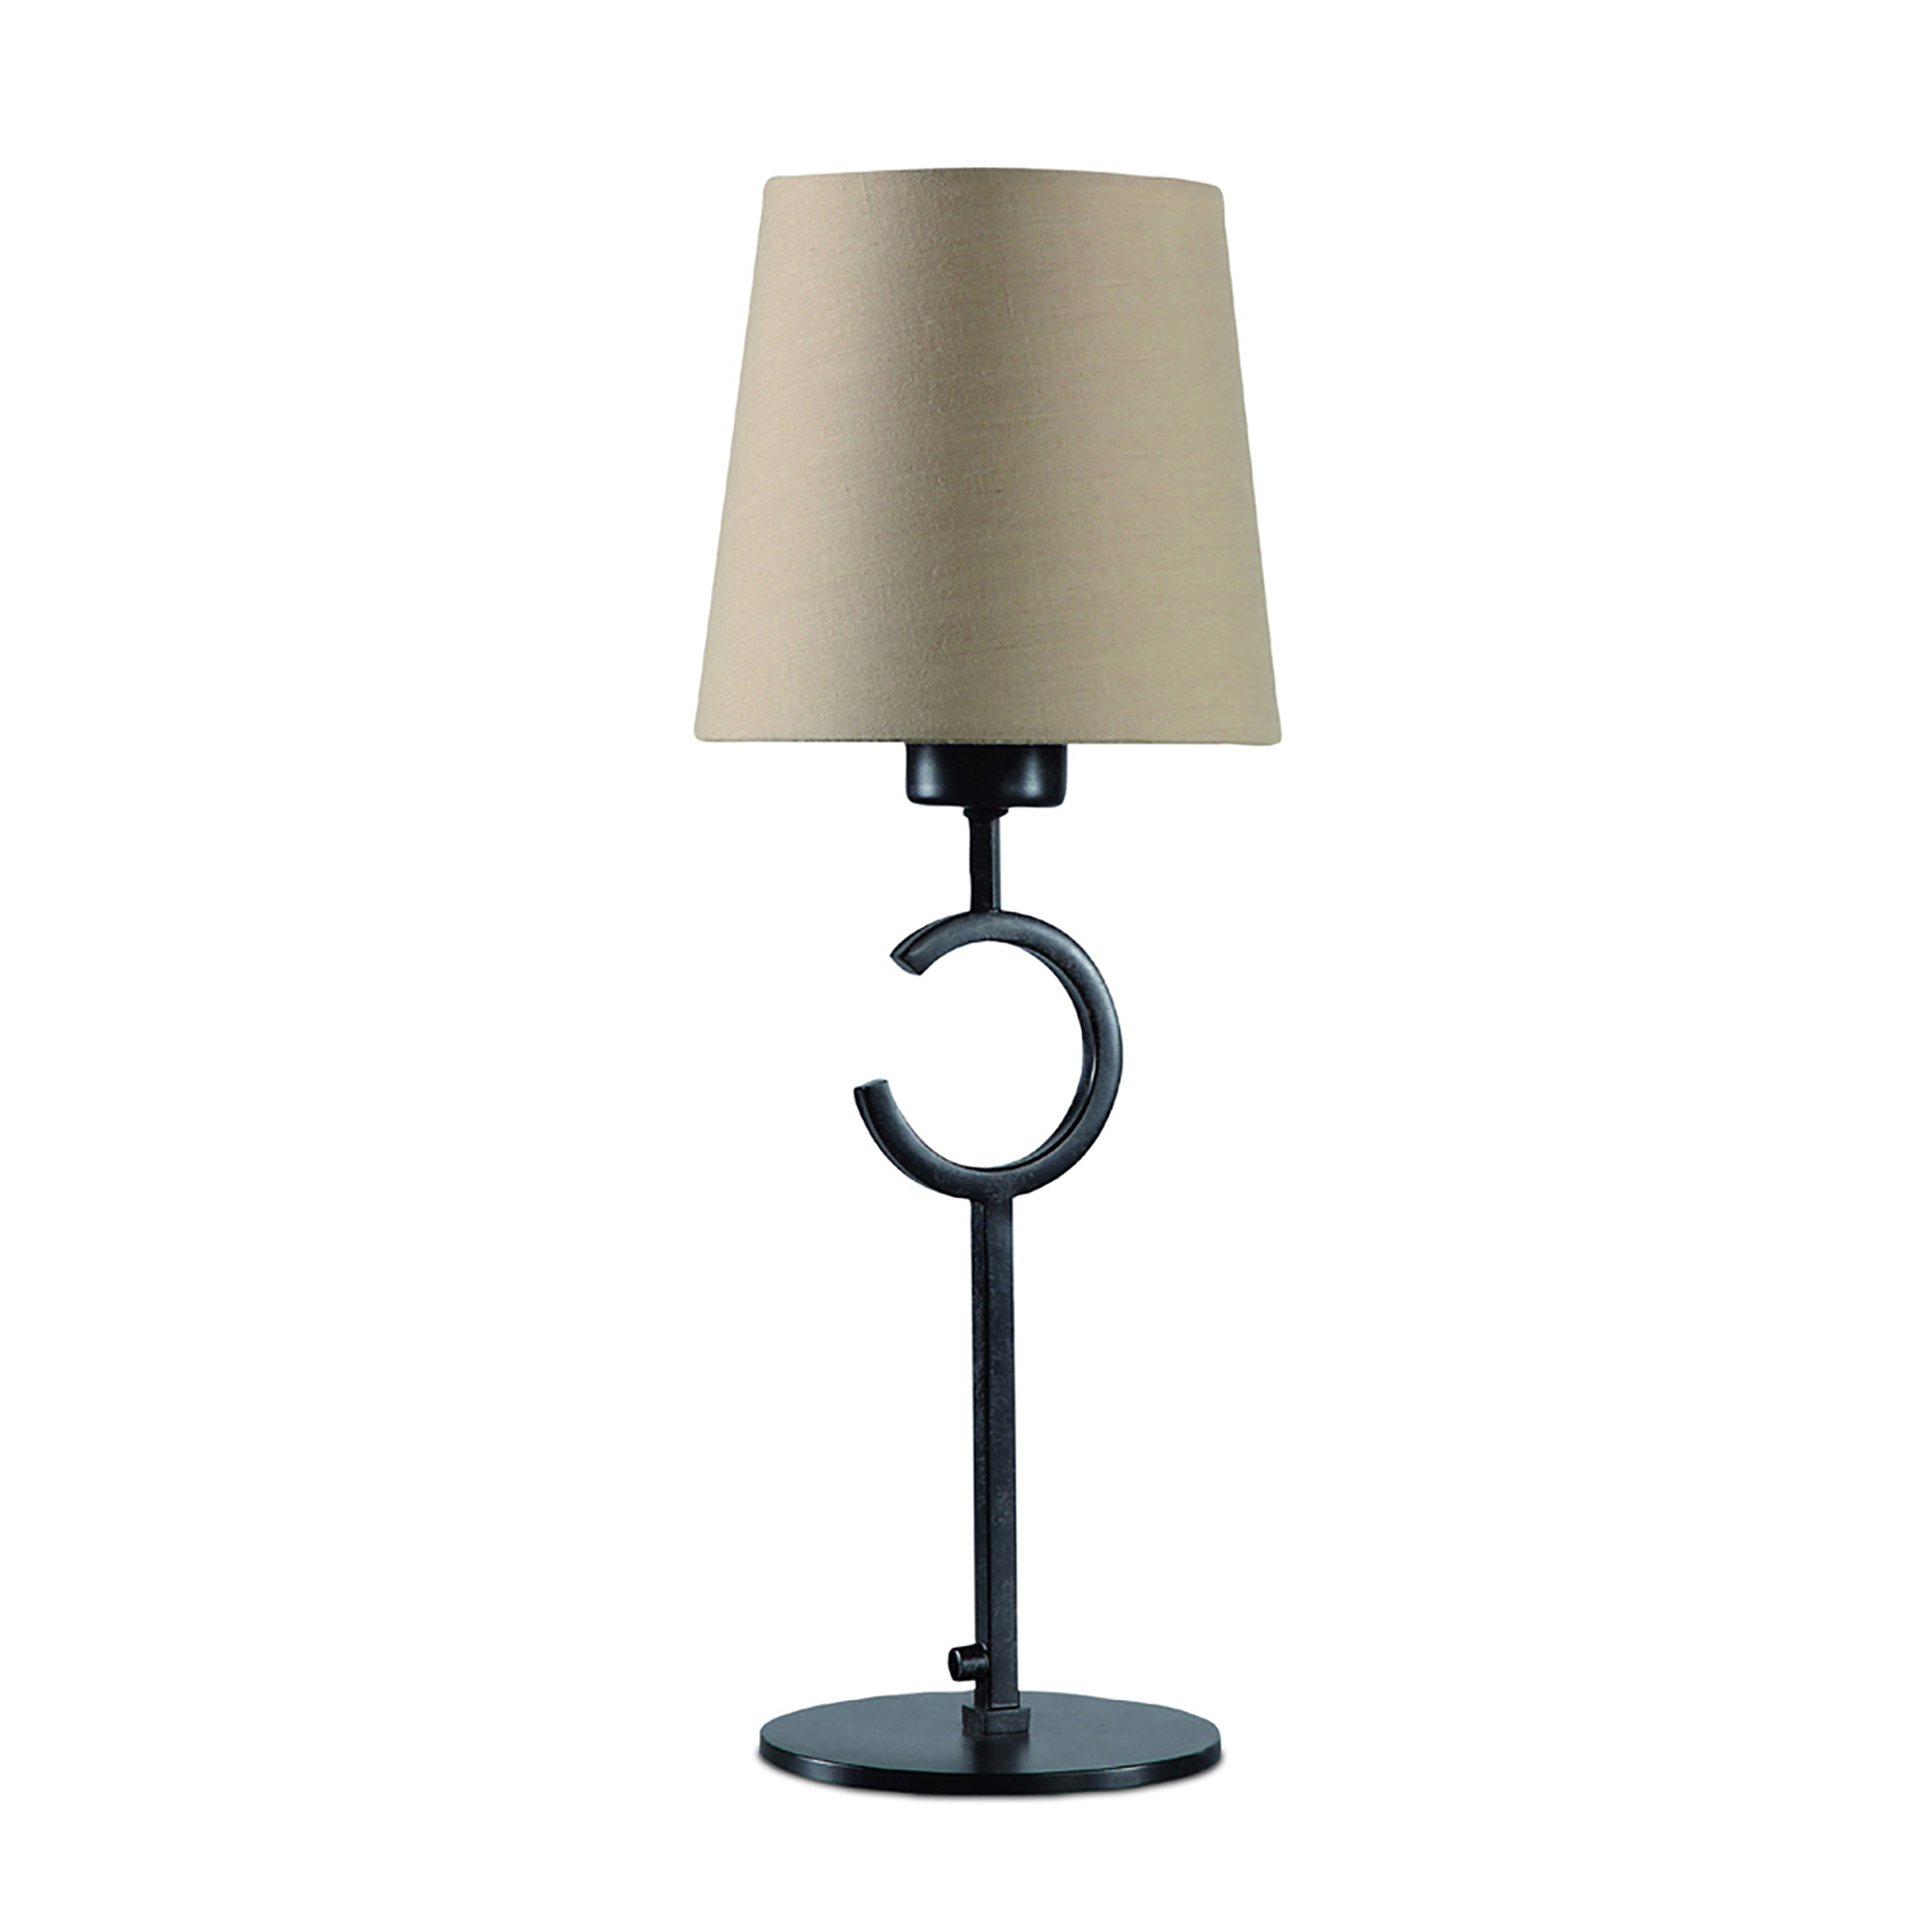 Argi Table Lamps Mantra Shaded Table Lamps